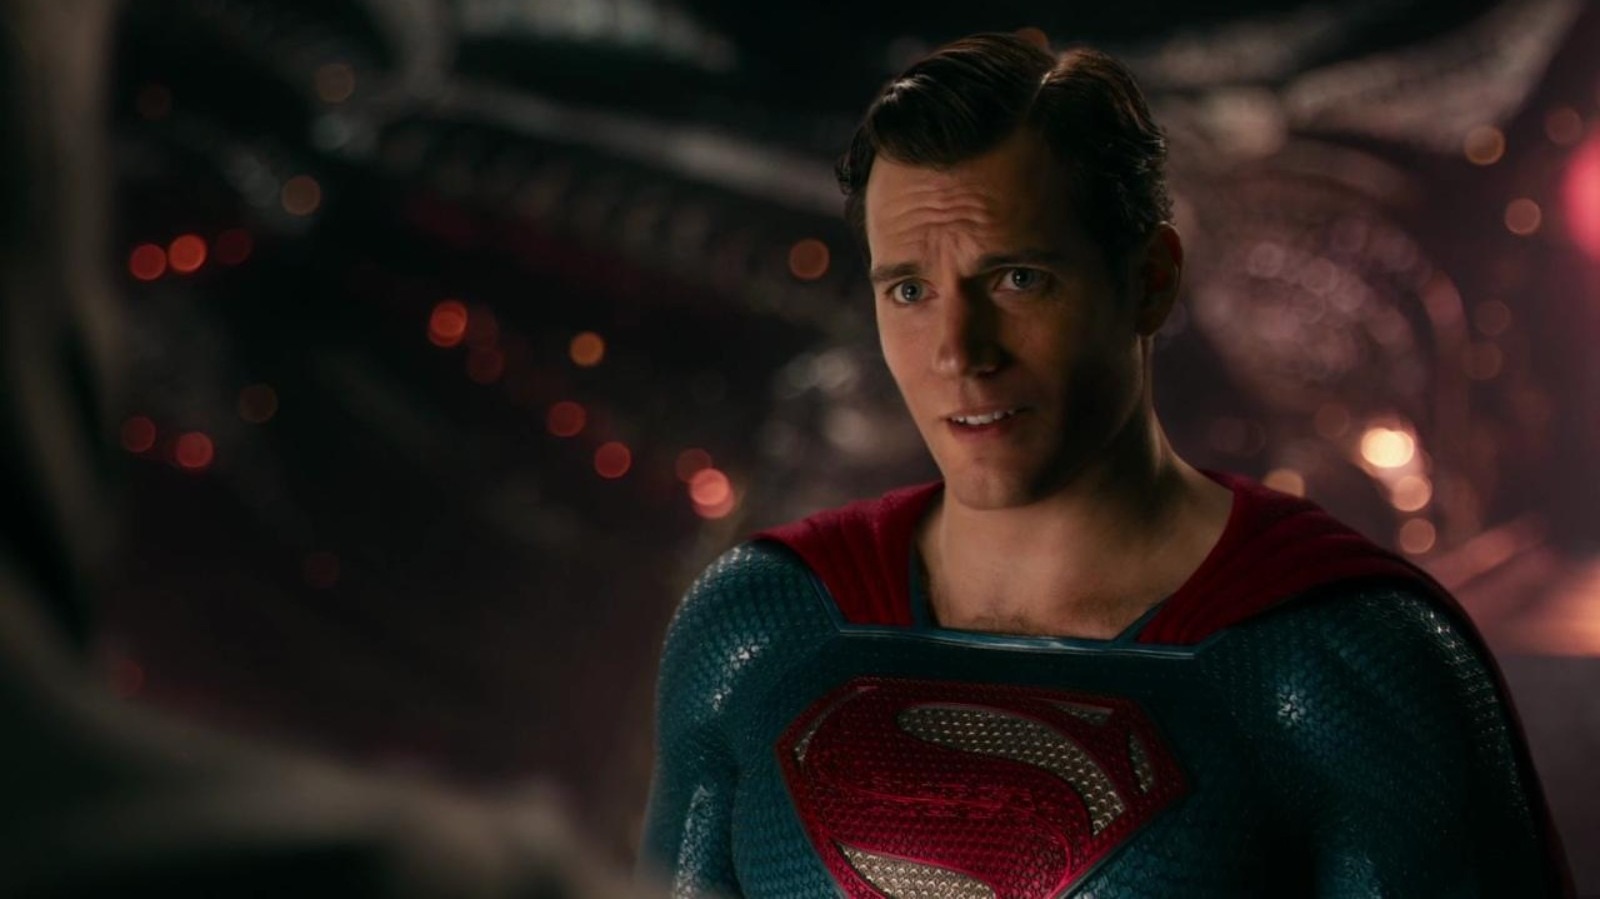 Henry Cavill in Talks to Return as Superman for Warner Bros - TheWrap